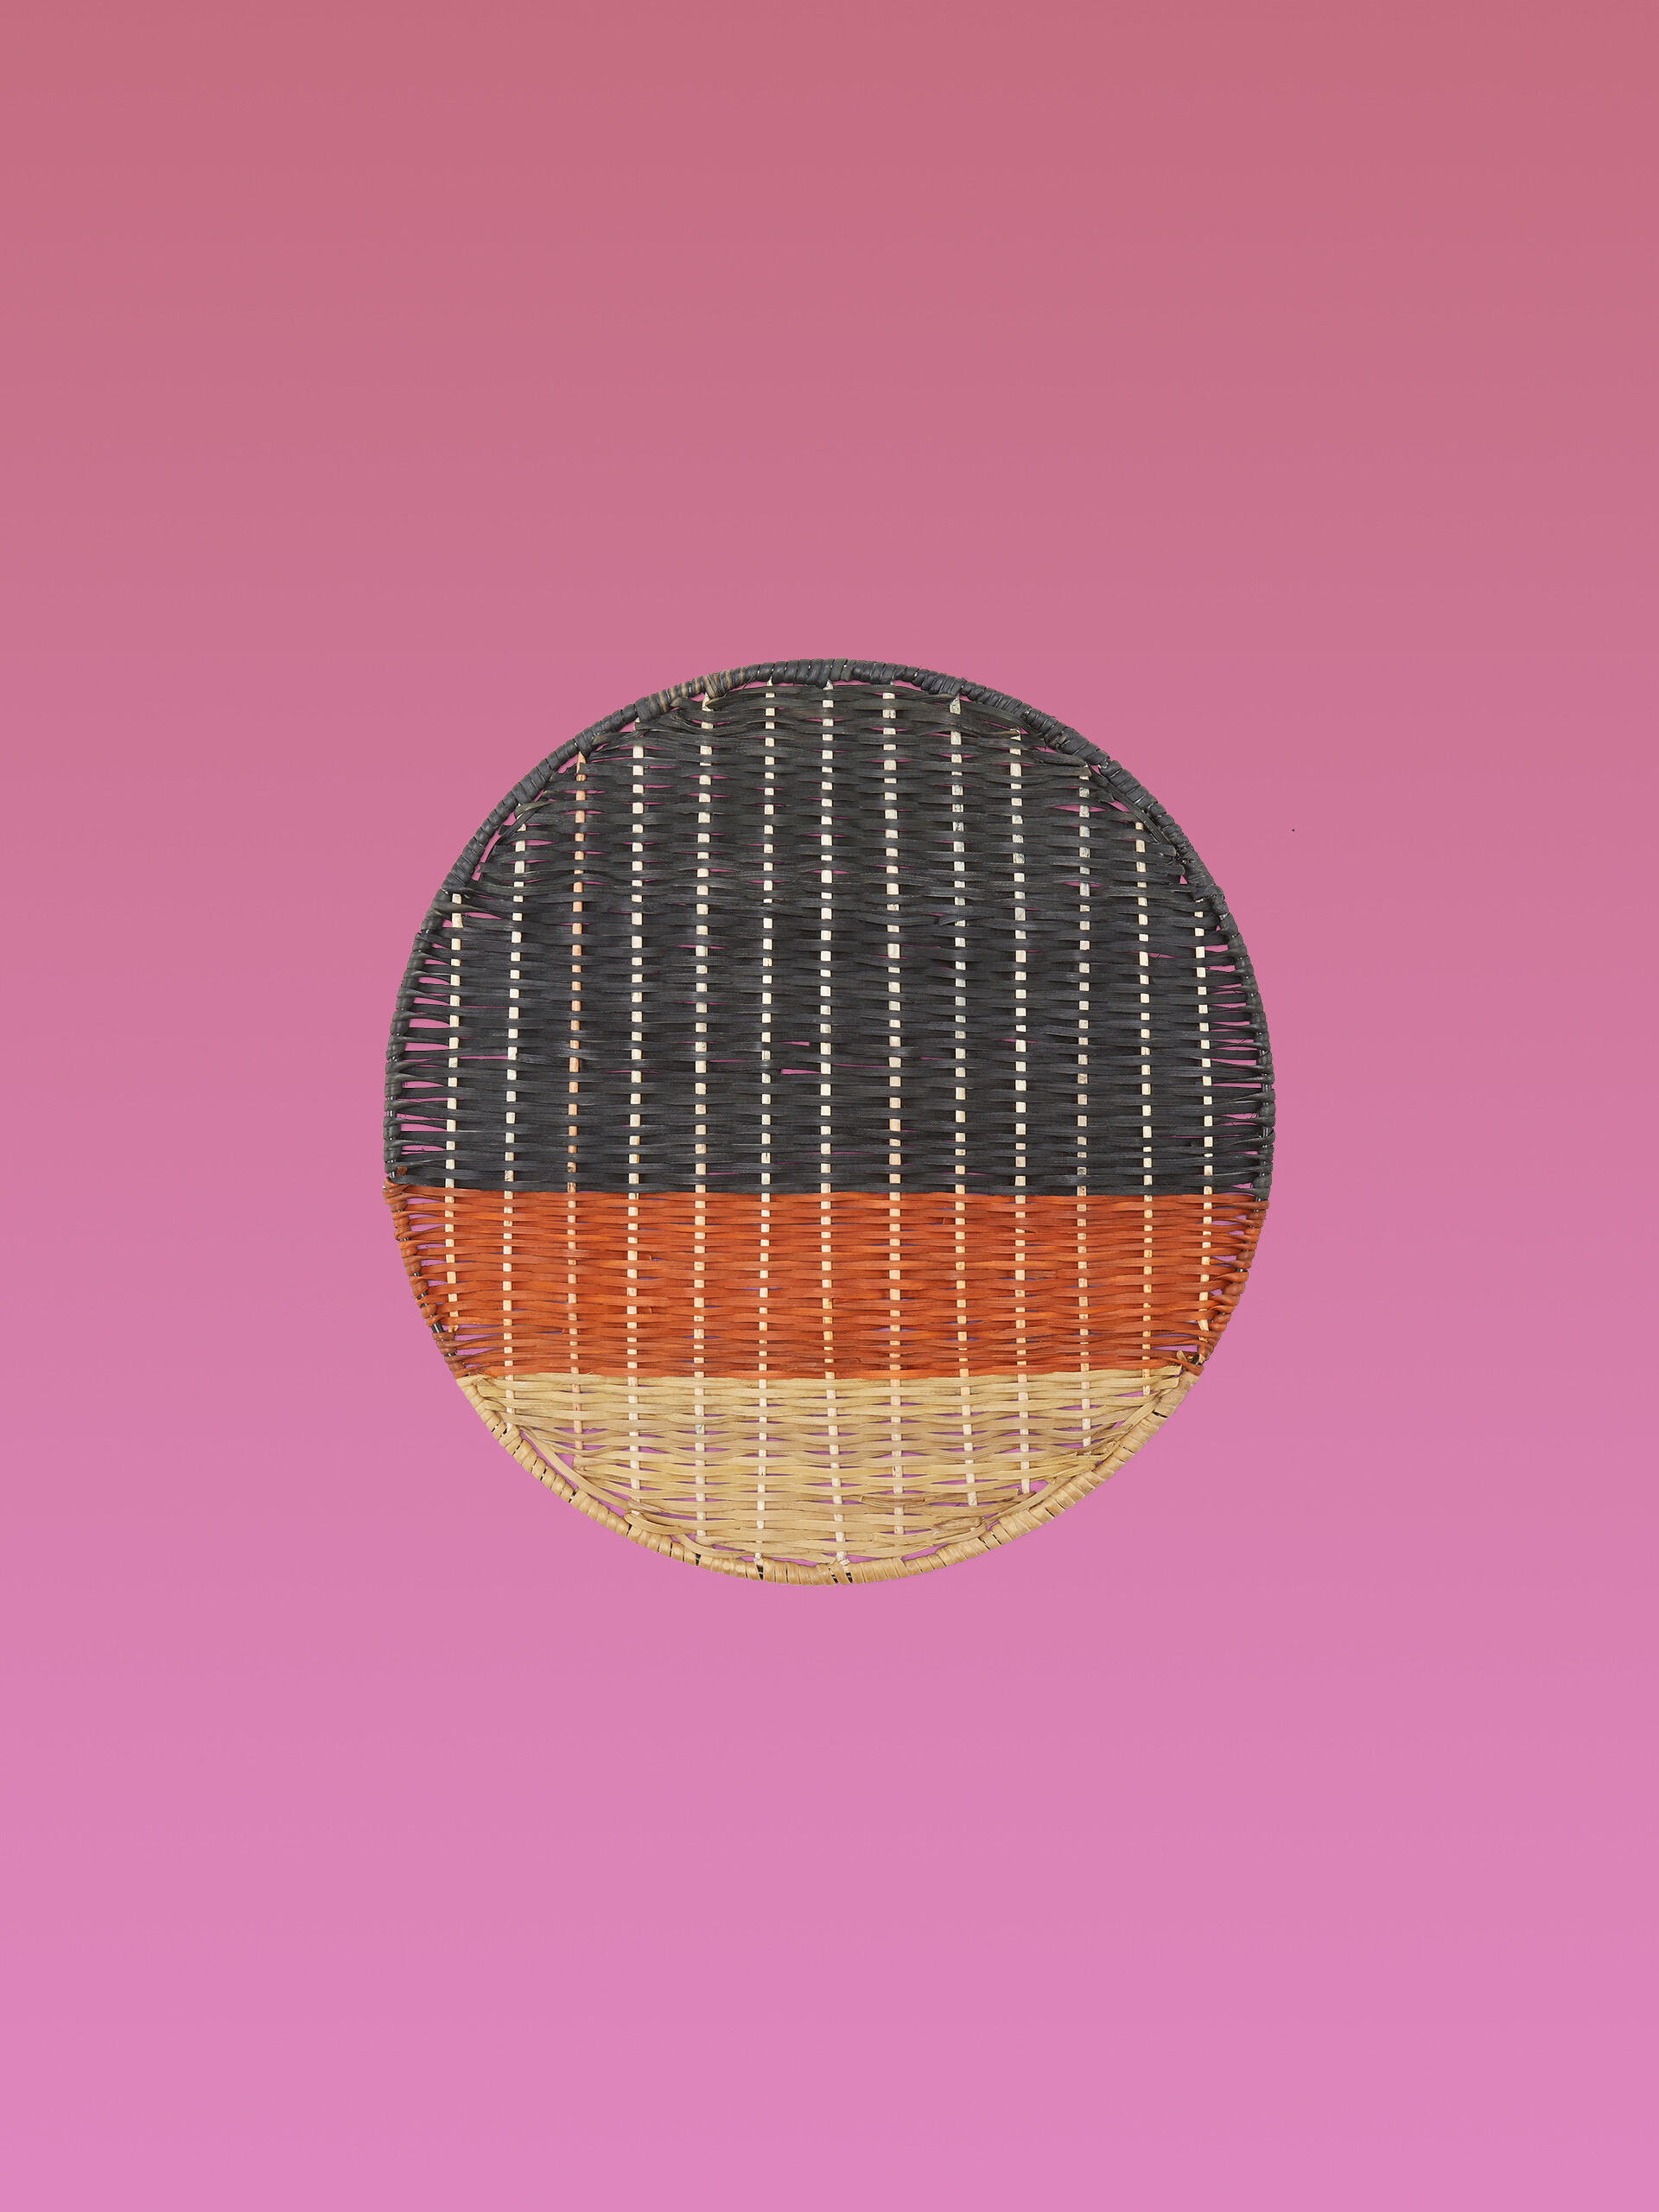 MARNI MARKET round placemat with colour-block motif in iron and beige, burgundy and black wicker - Home Accessories - Image 1